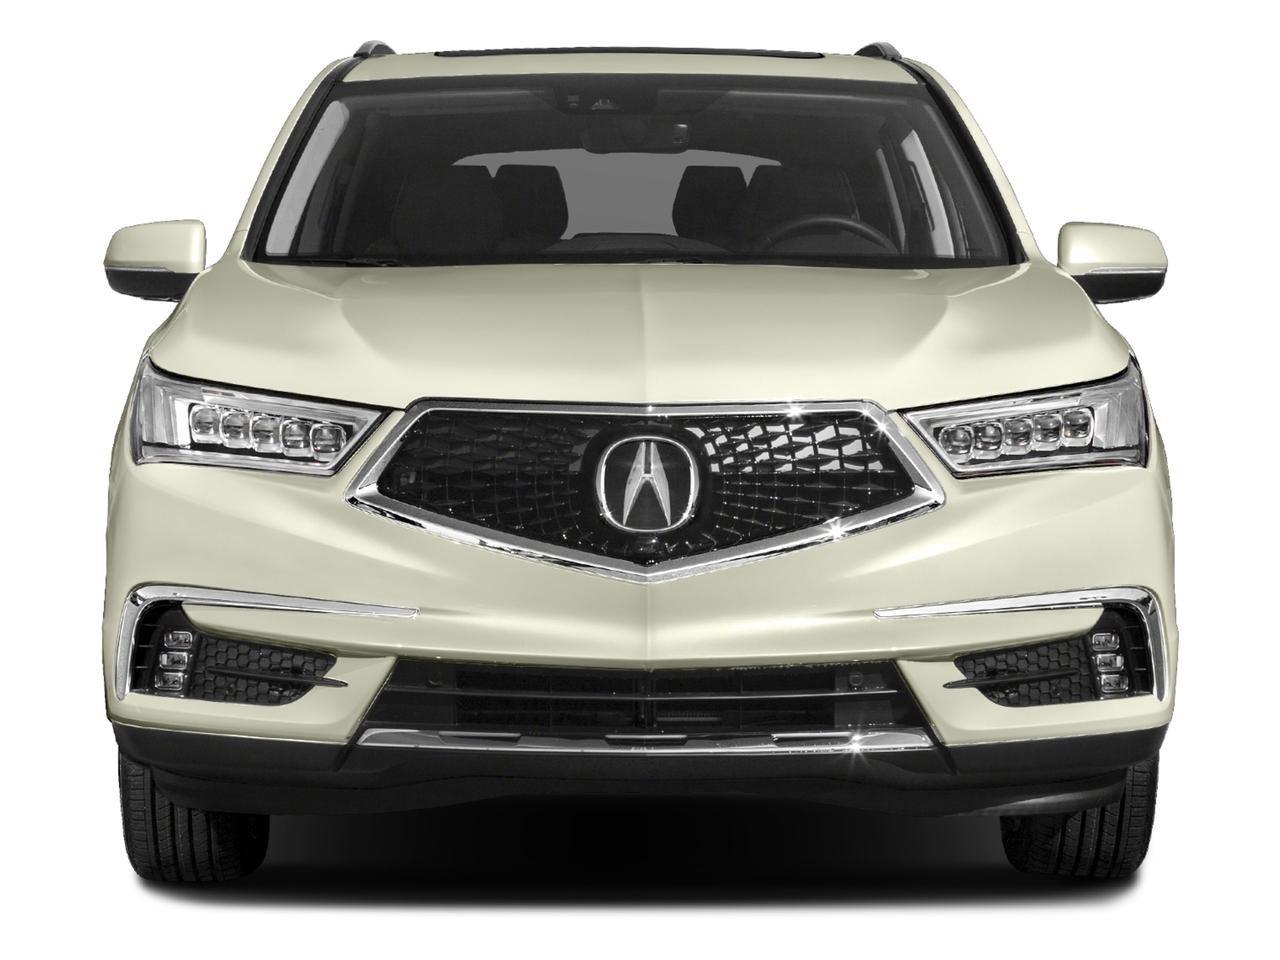 2017 Acura MDX Vehicle Photo in Clearwater, FL 33761